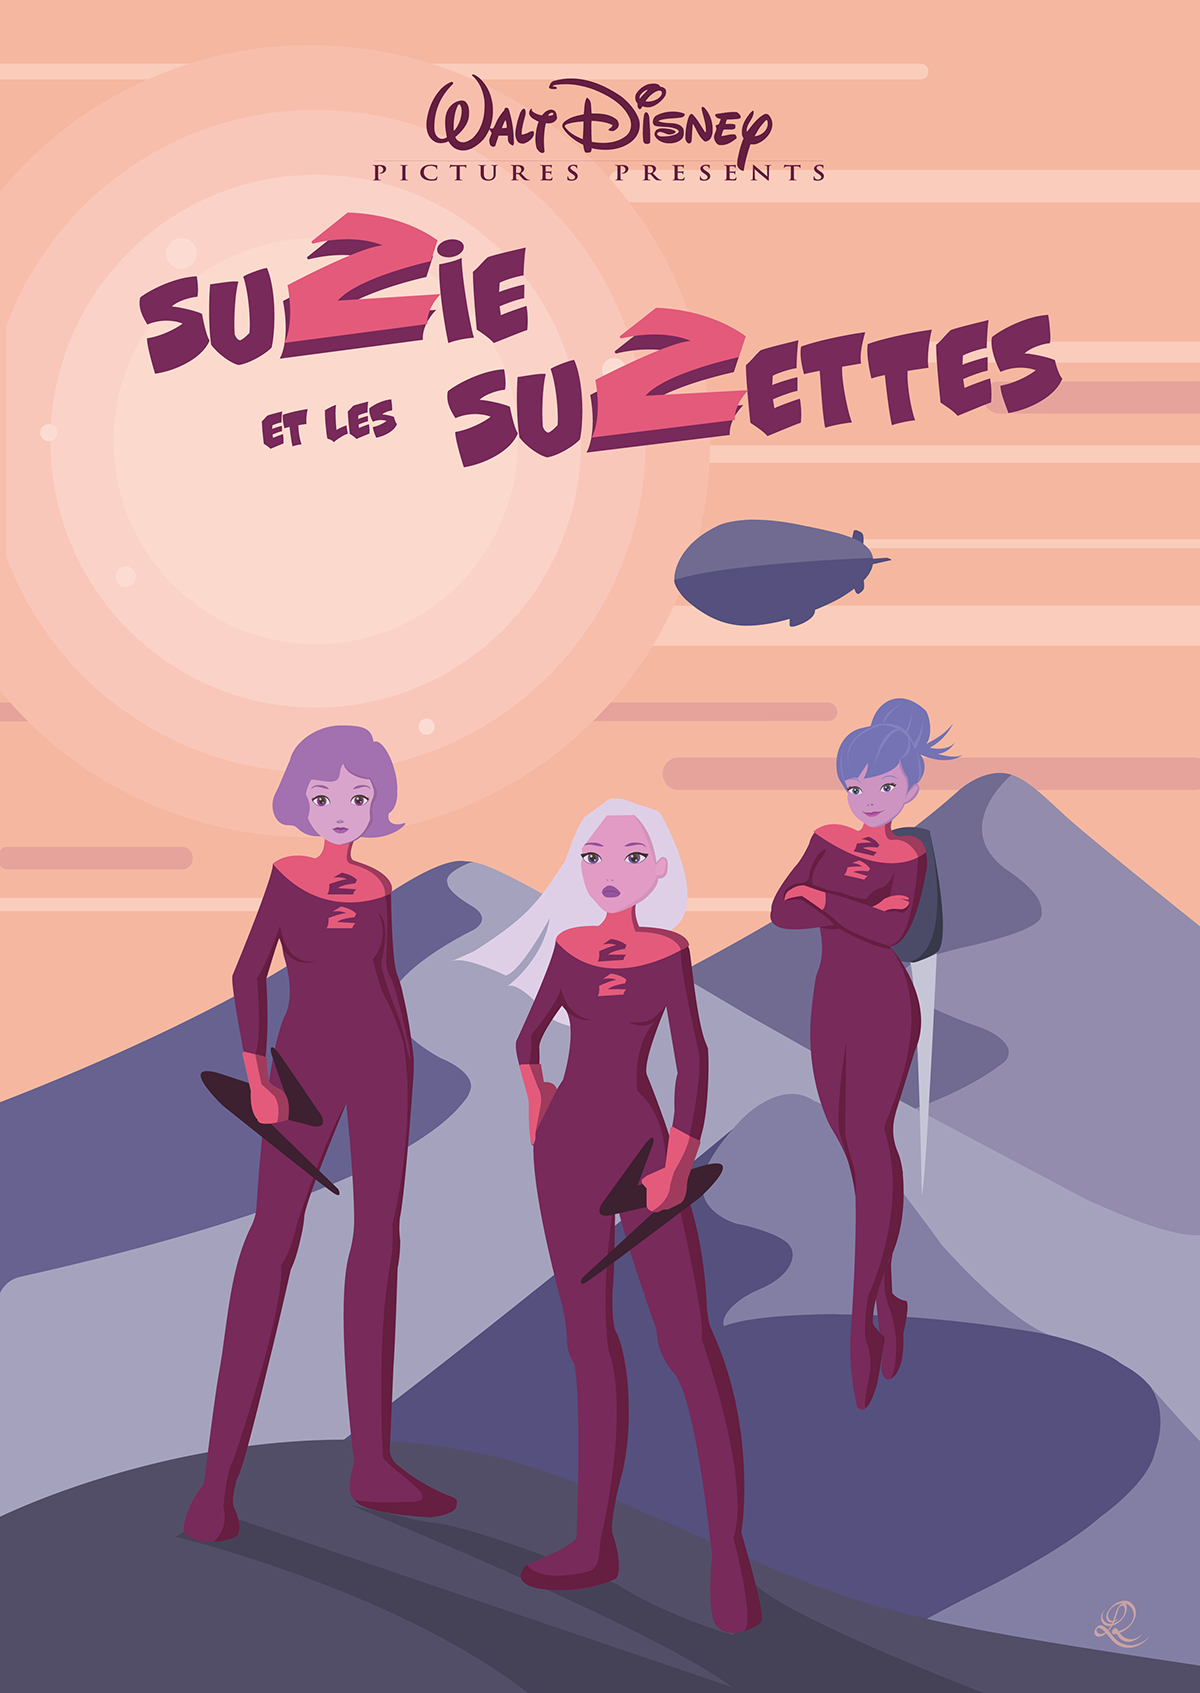 Animated Movie Poster: "Suzie and the Suzettes"
